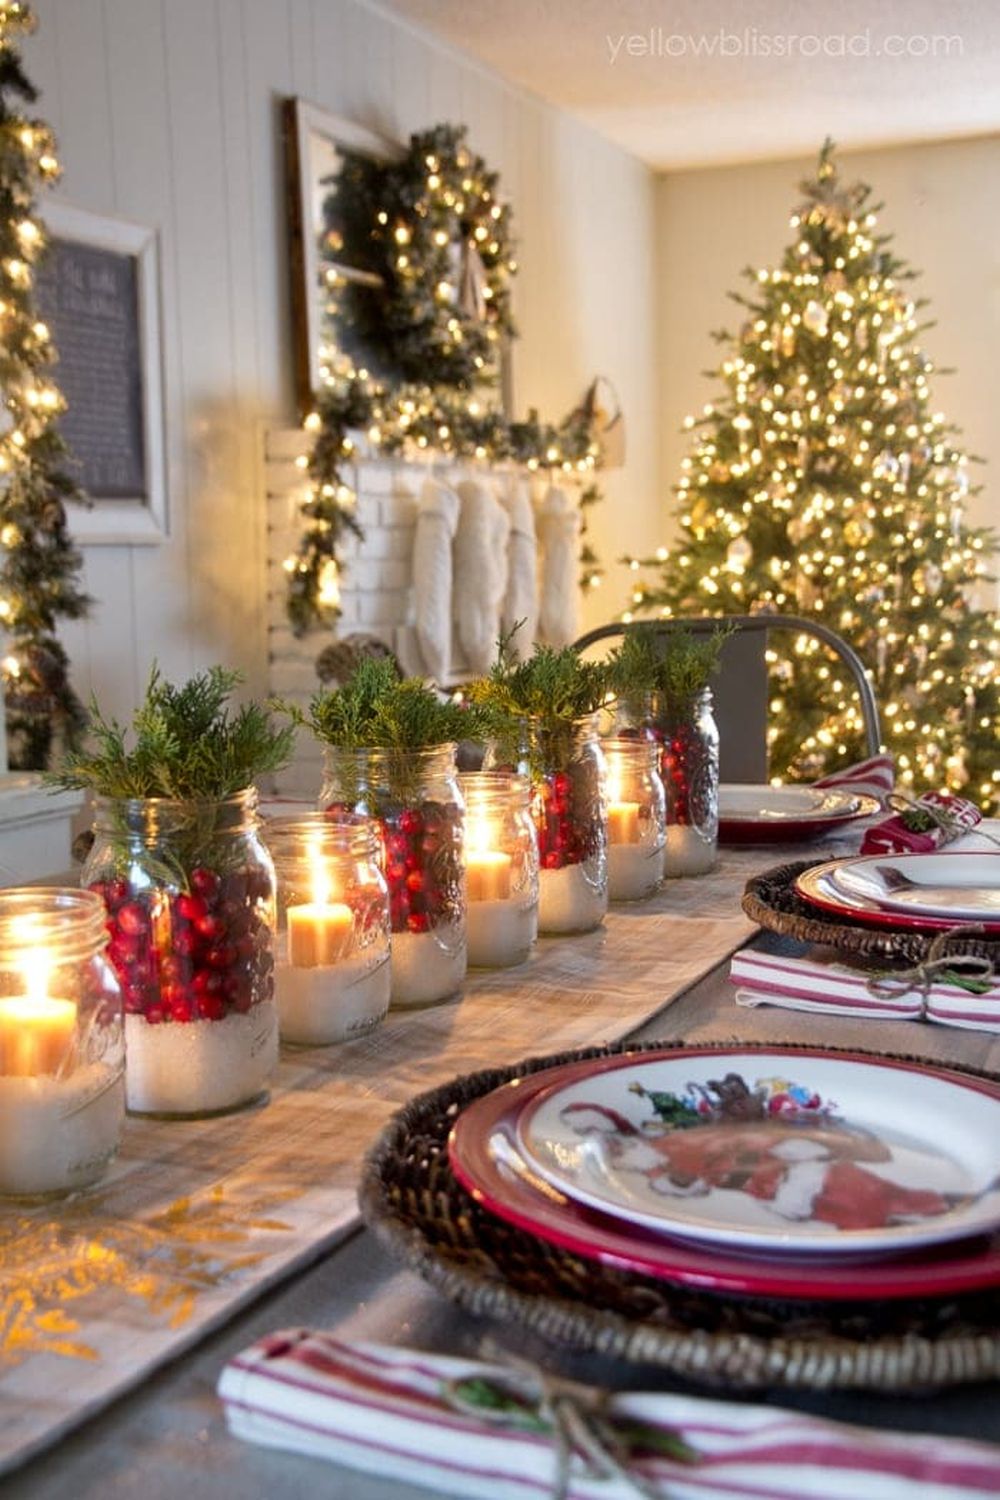 Classical red and white christmas tablescapes